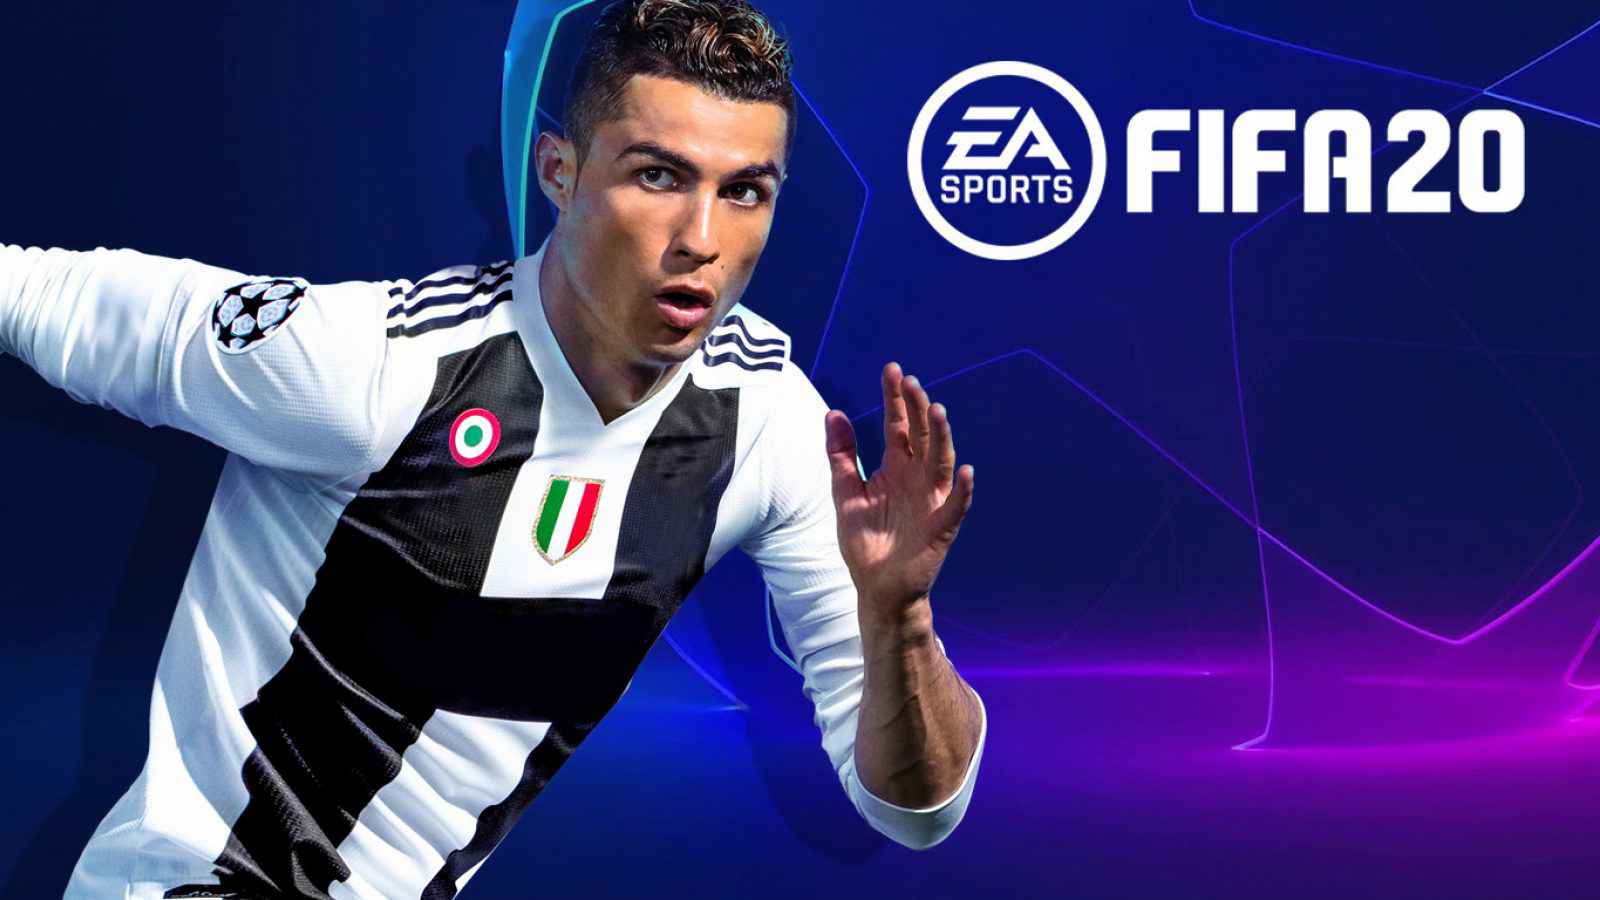 FIFA 20 Title Update 14 (March 31) PC patch notes - New Faces, New Teams, New Kits & CONMEBOL Competition changes